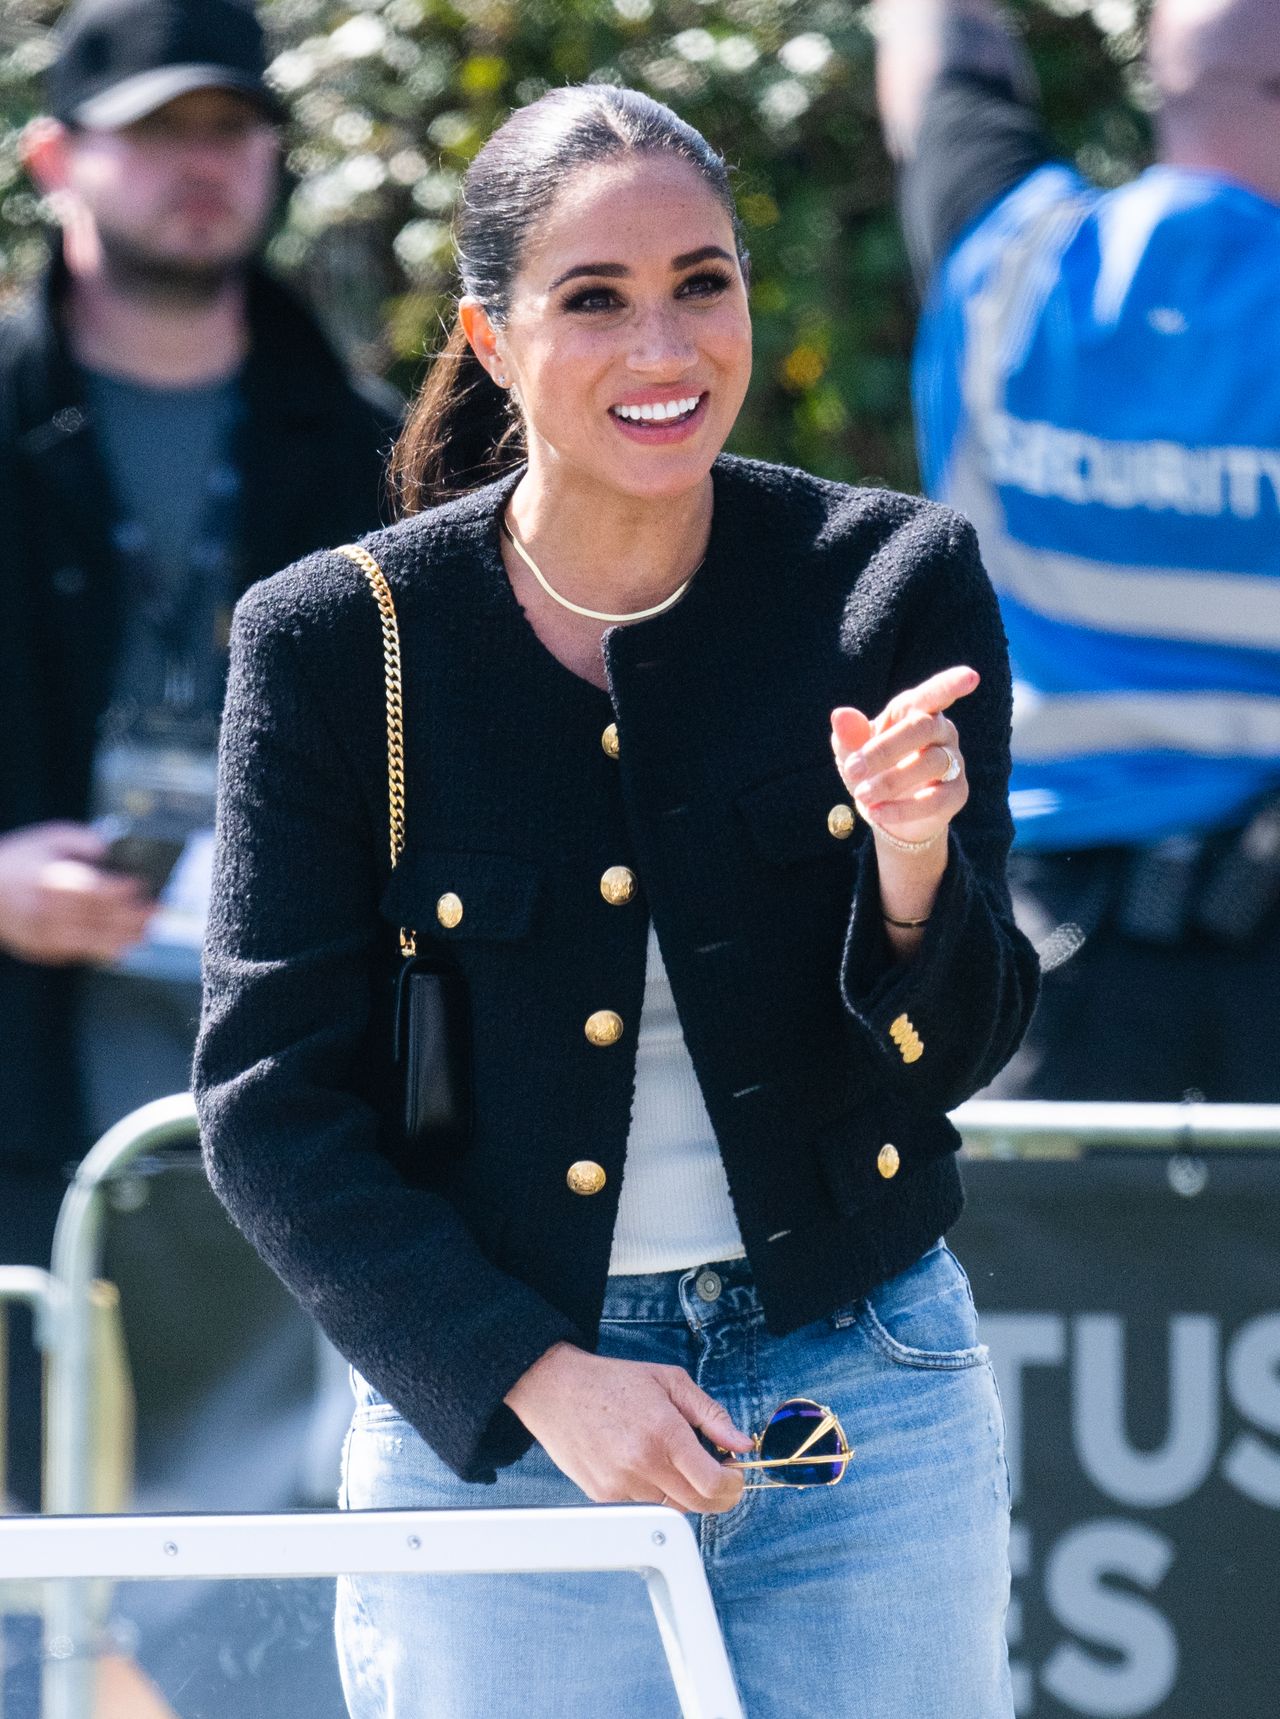 Meghan Markle Wore White Every Day at the Invictus Games | Marie Claire